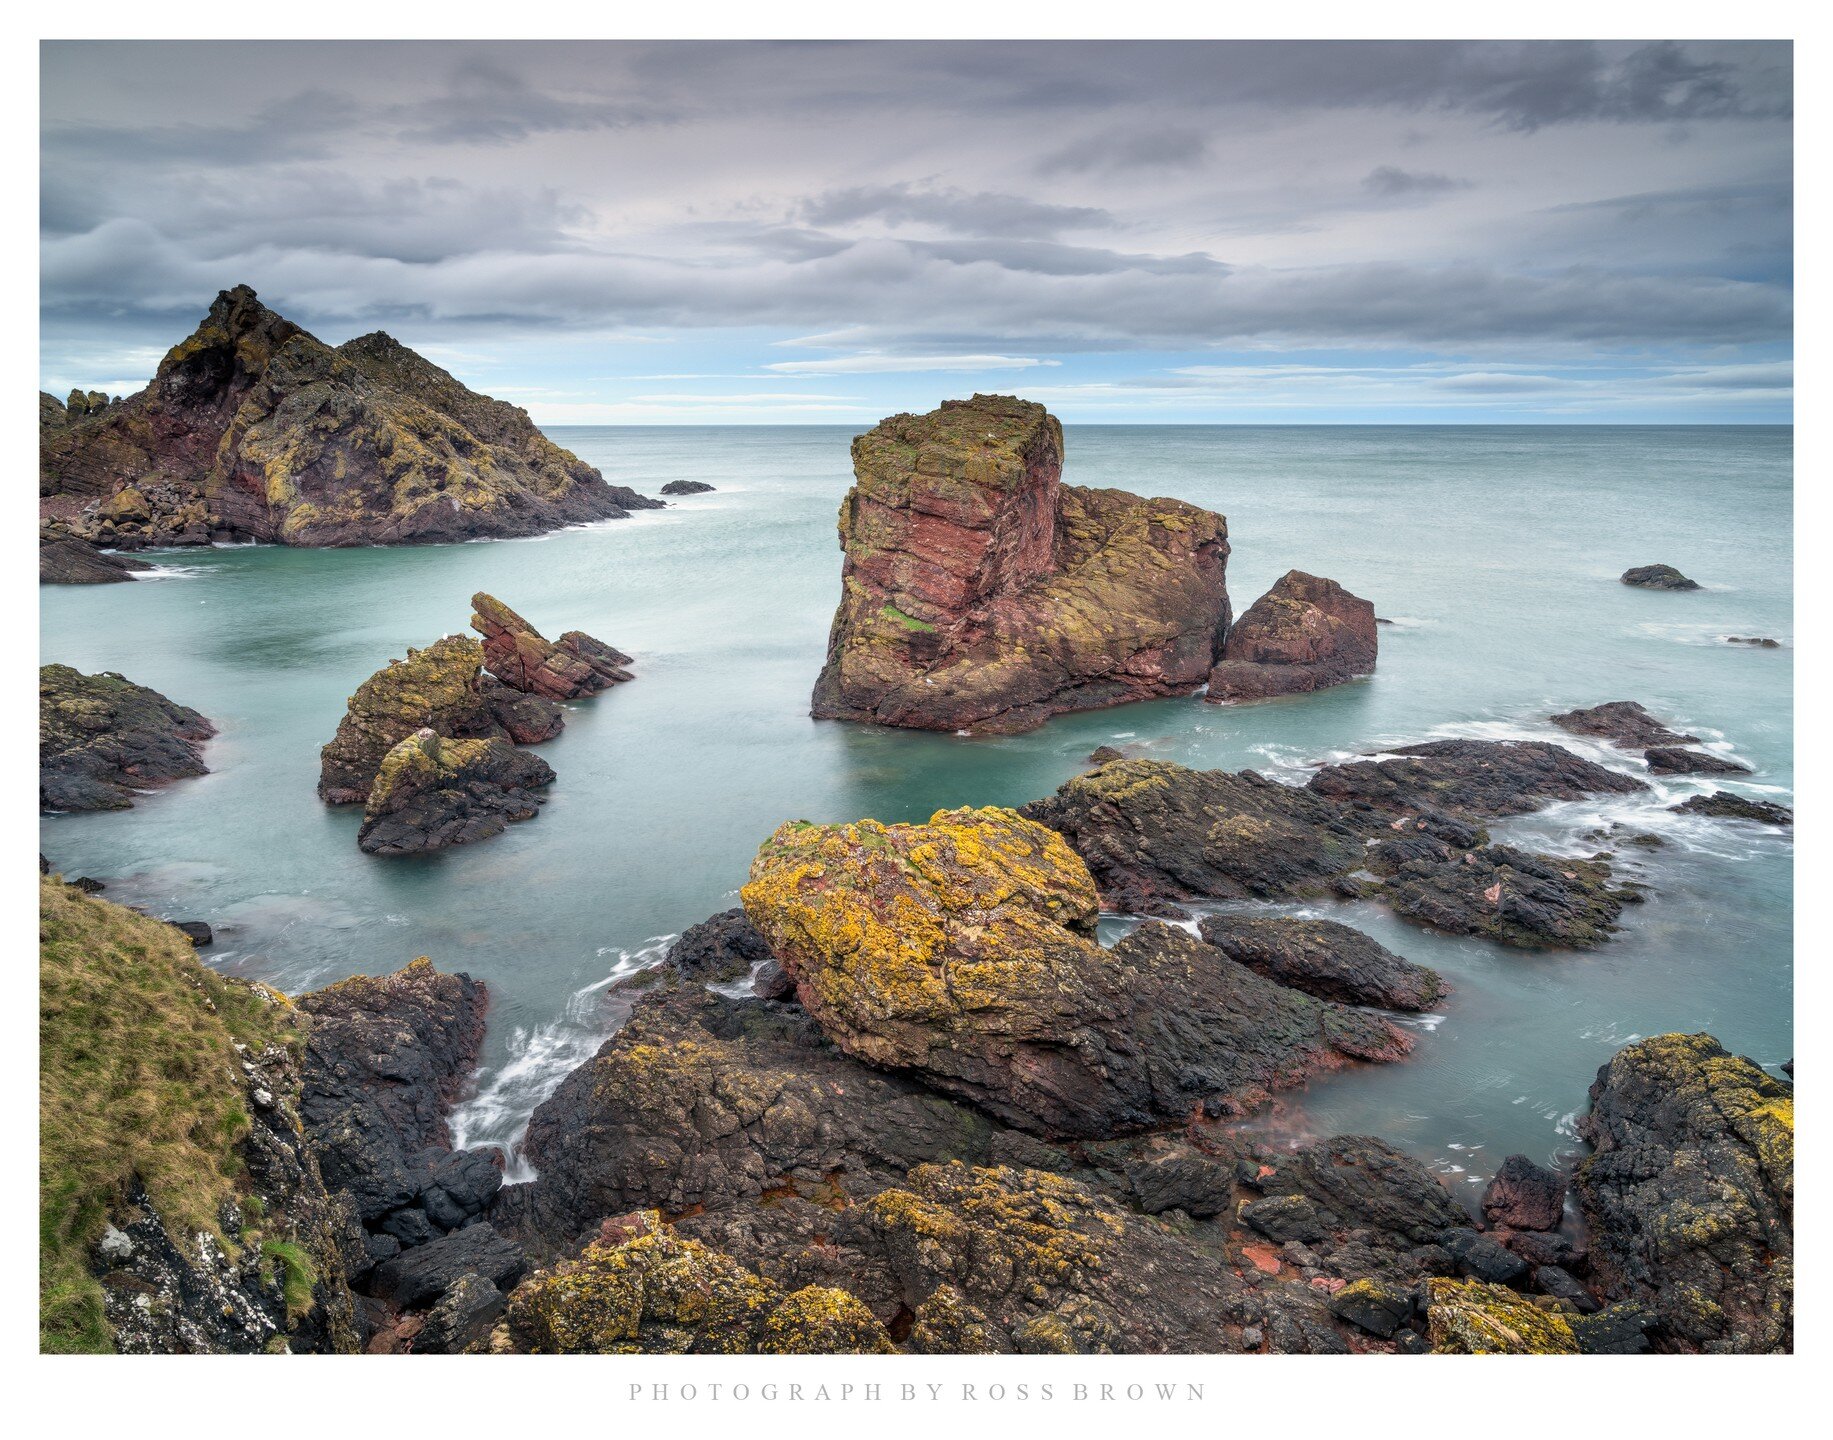 St Abb&rsquo;s Head, Scottish Borders, February 2024

Watching the cloudscape and the gentle ebb and flow of the tide. 

#nature #naturephotography #landscapephotography #natgeohub #natgeowild #natgeolandscape #JustGoShoot #InstaGood #InstaPhoto #Pic